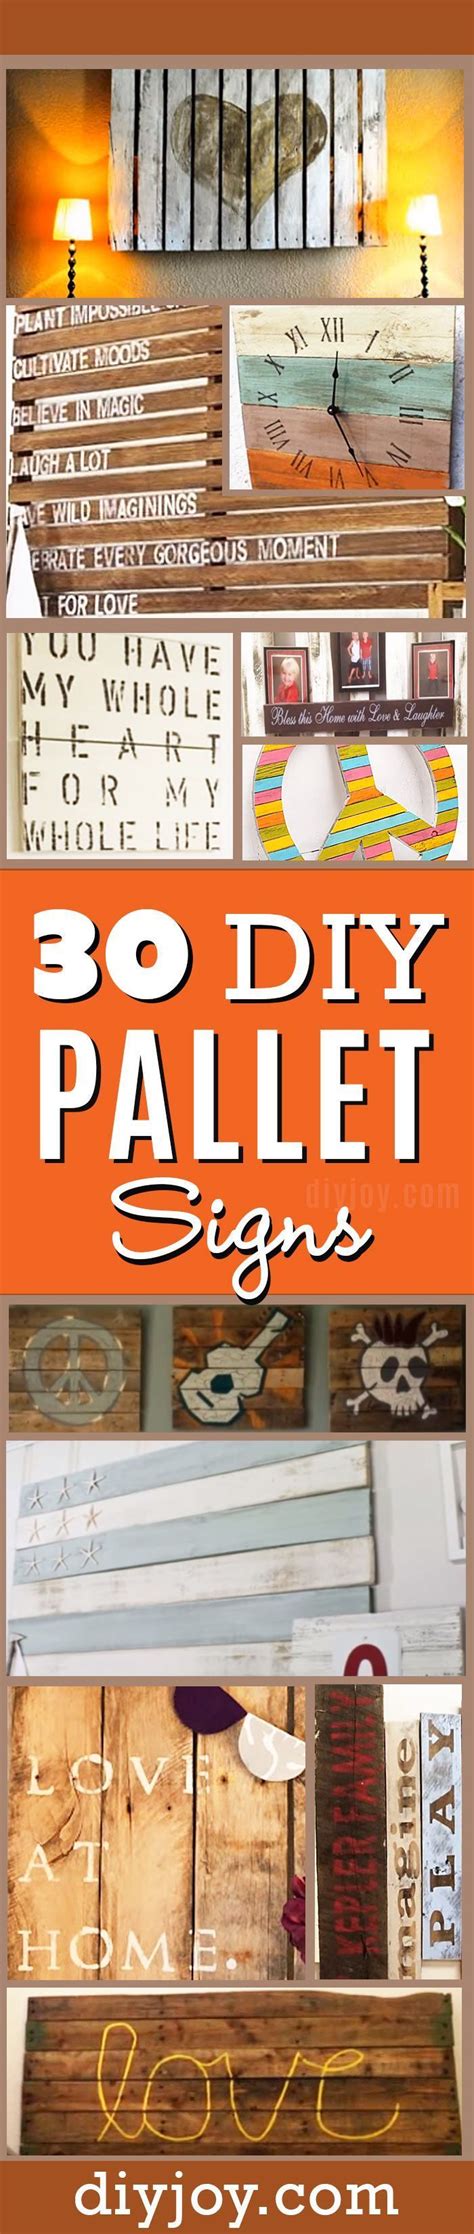 Pallet Sign Ideas Diy Pallet Signs And Wall Art For Cheap Rustic Home